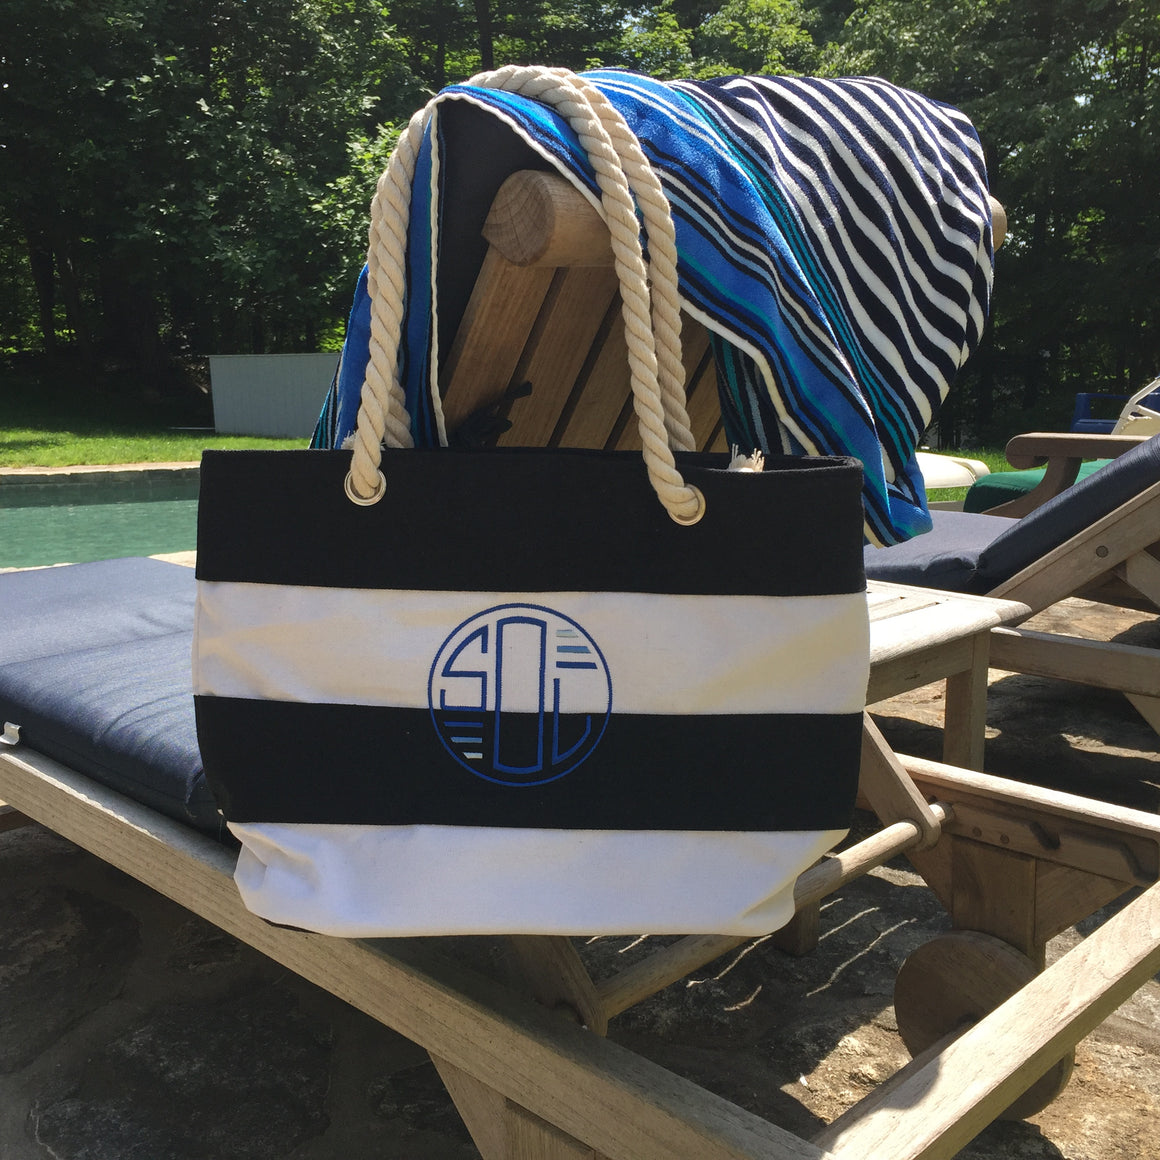 Monogrammed Personalized Shopping Tote/Purse Striped with Rope Handle and Matching Towel